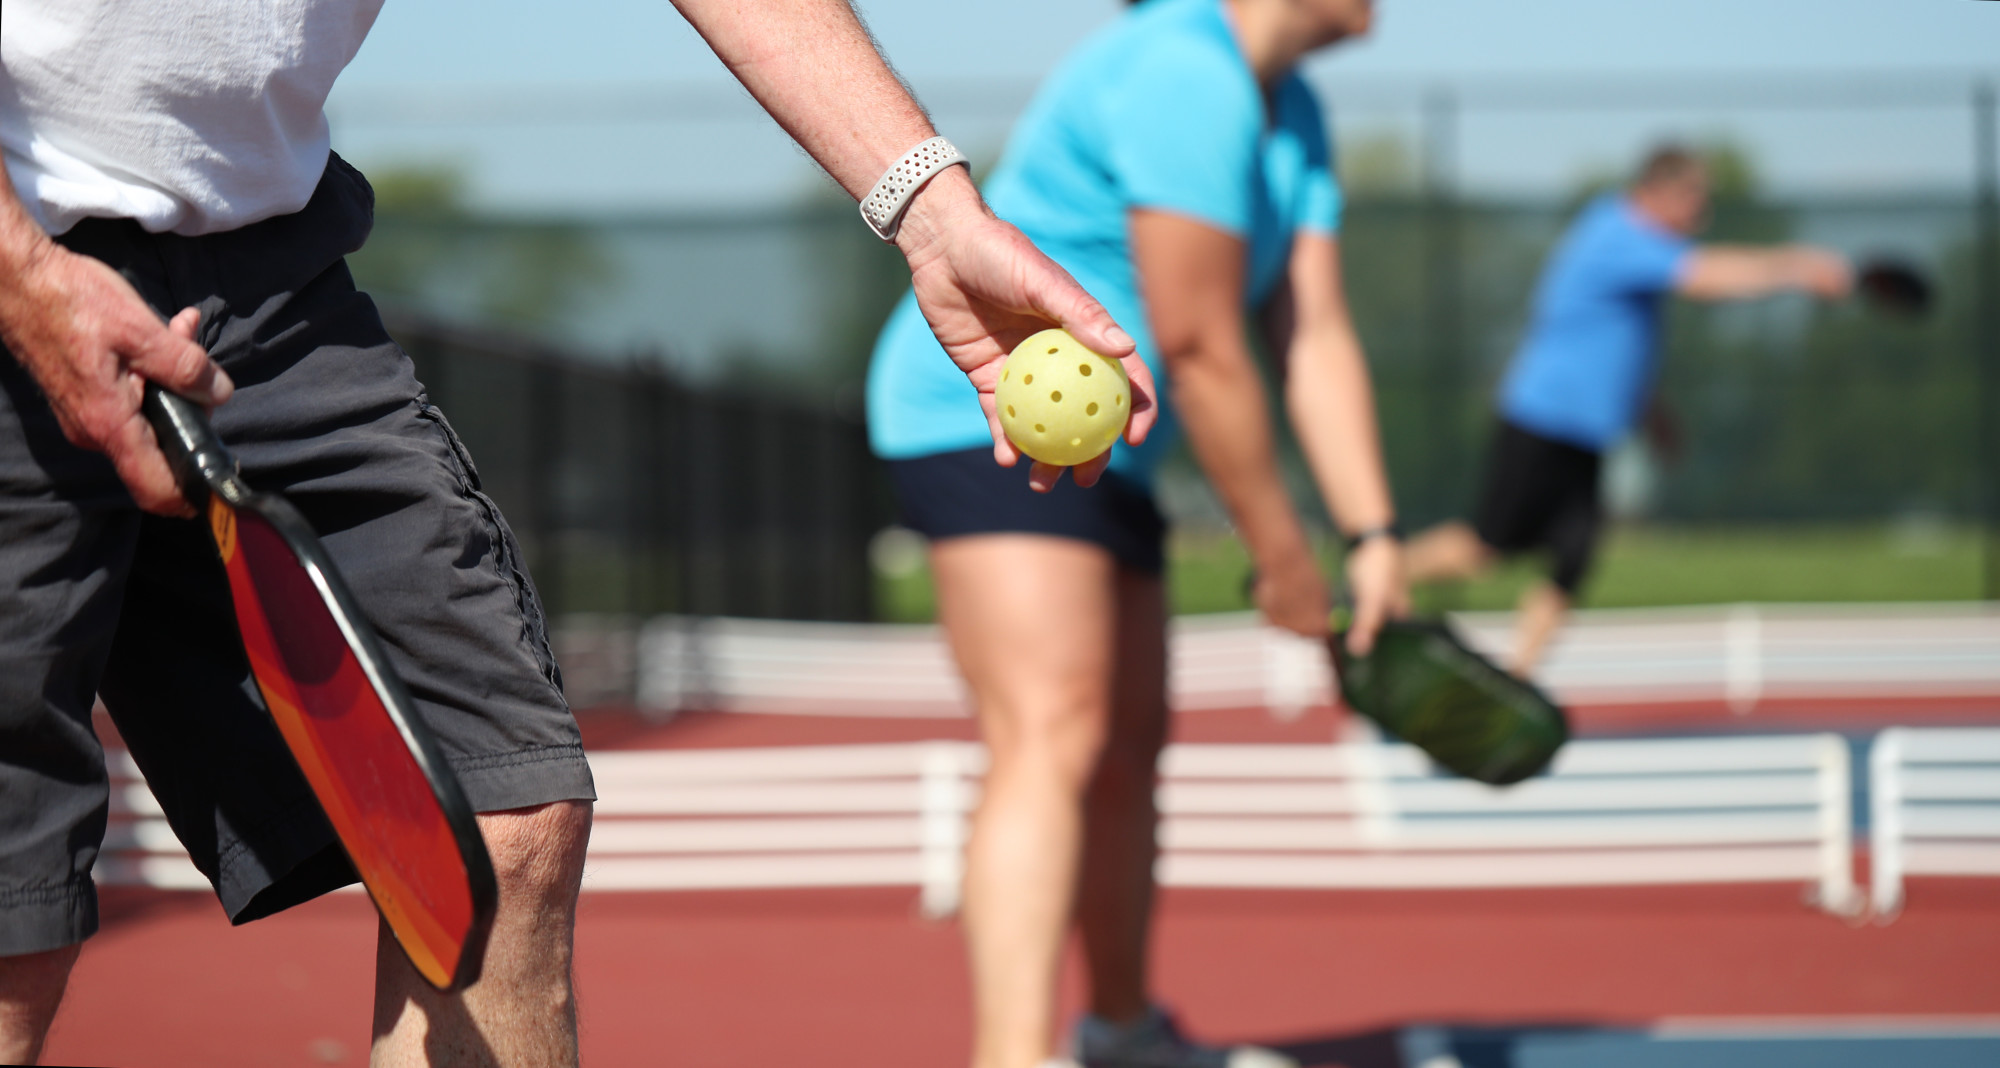 5 Pickleball Rules That Show Why Pickleball Rules